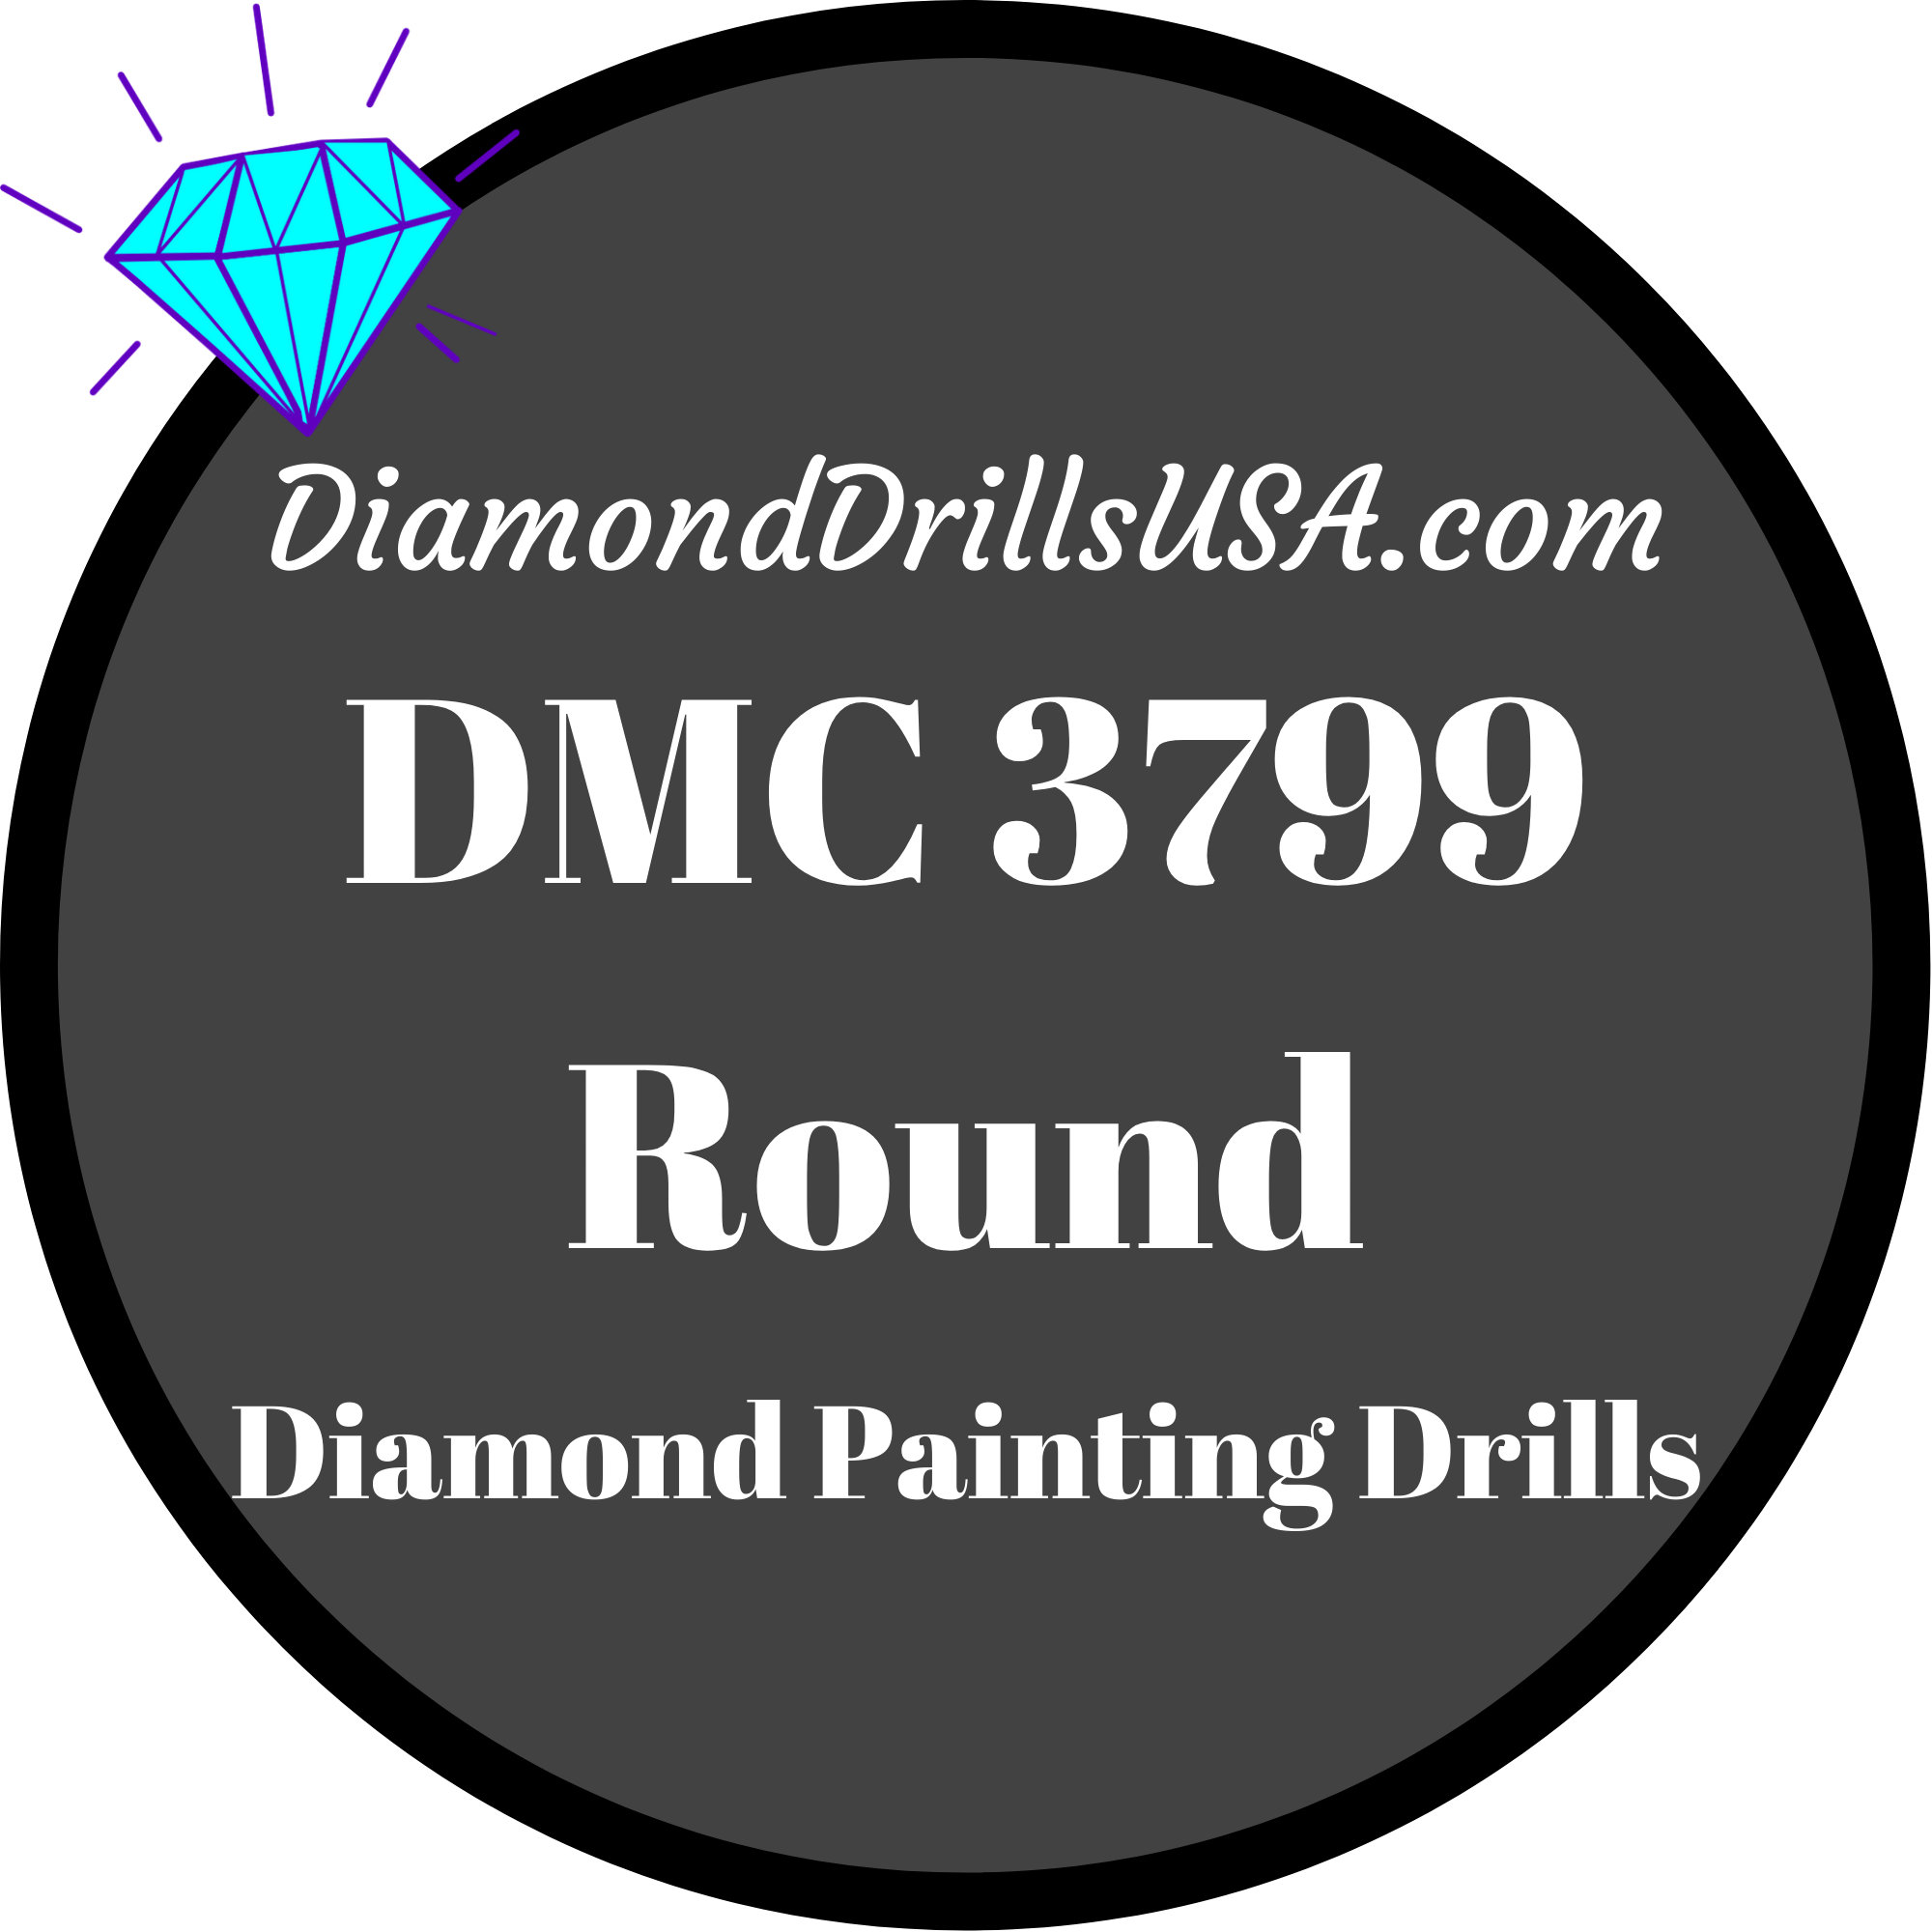 DiamondDrillsUSA - Large White Drill Tray with Pen Holder & Wide